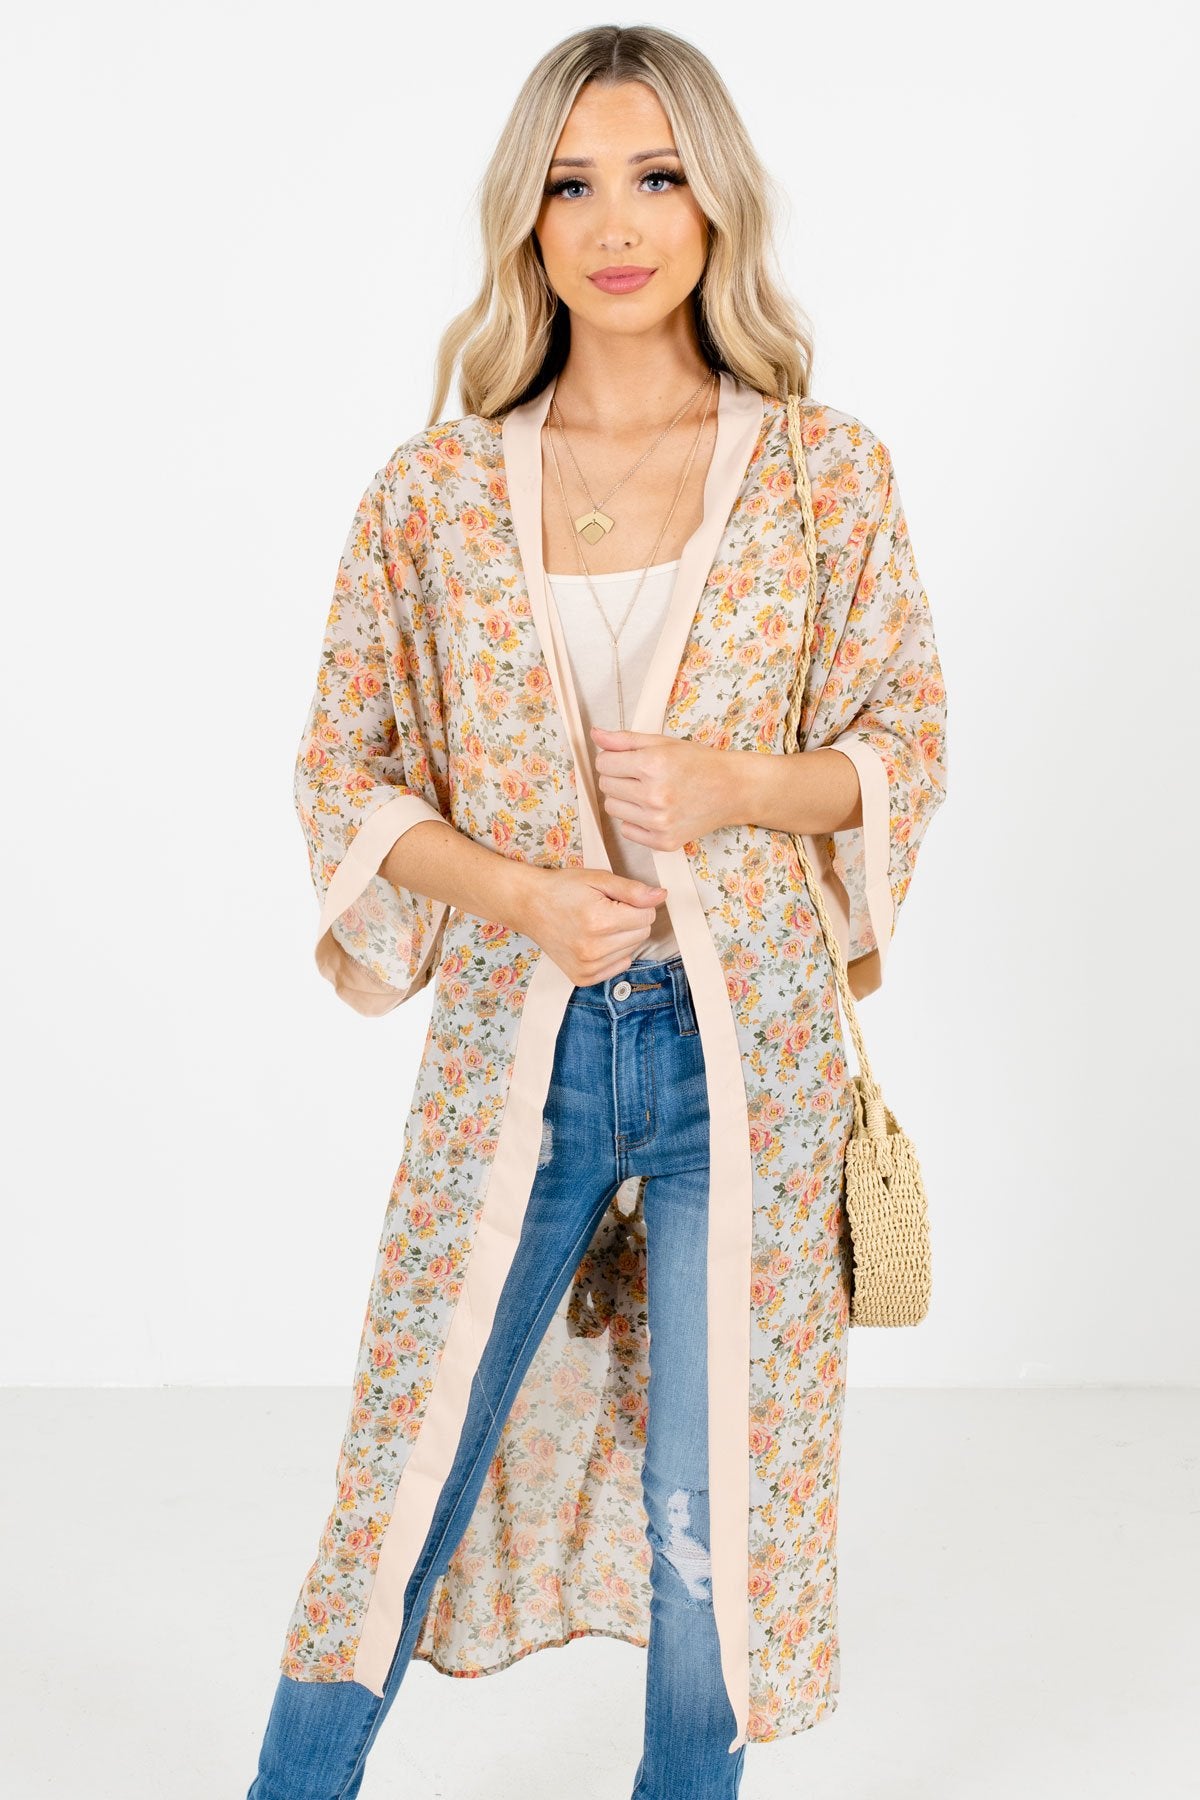 Pink Multicolored Floral Patterned Boutique Kimonos for Women